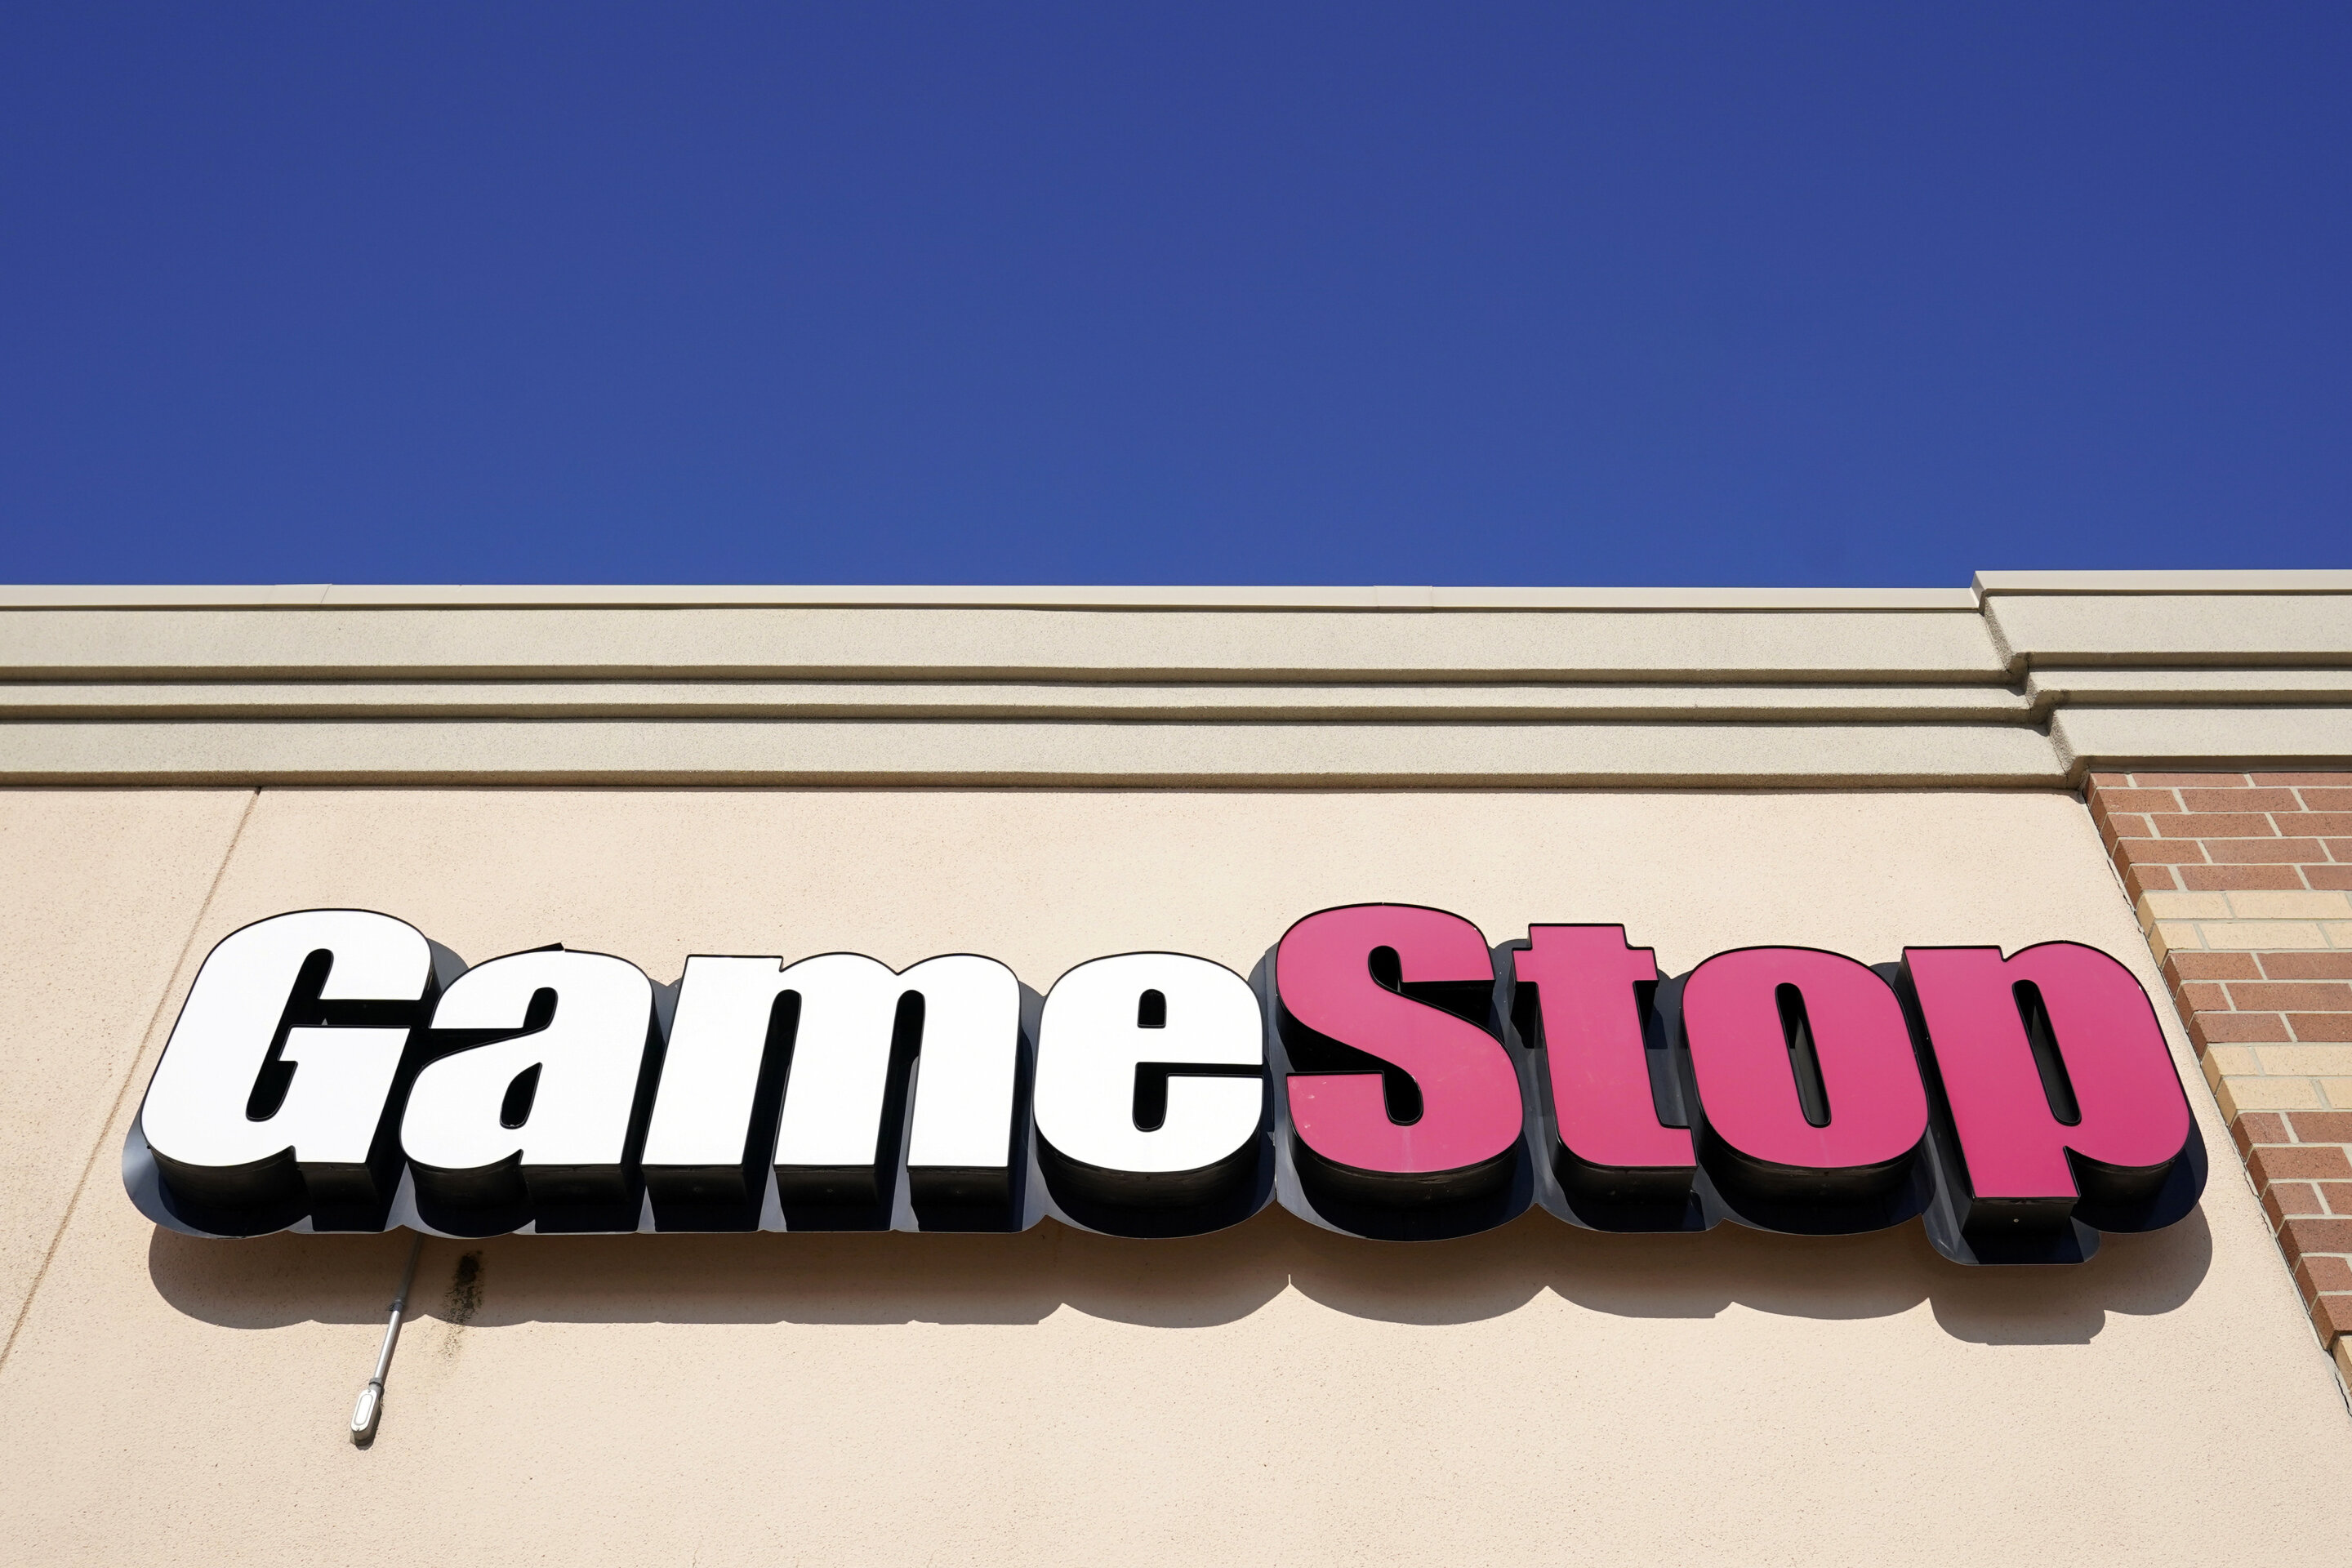 #Gamestop’s annual shareholder meeting disrupted after ‘unprecedented demand’ causes tech issue